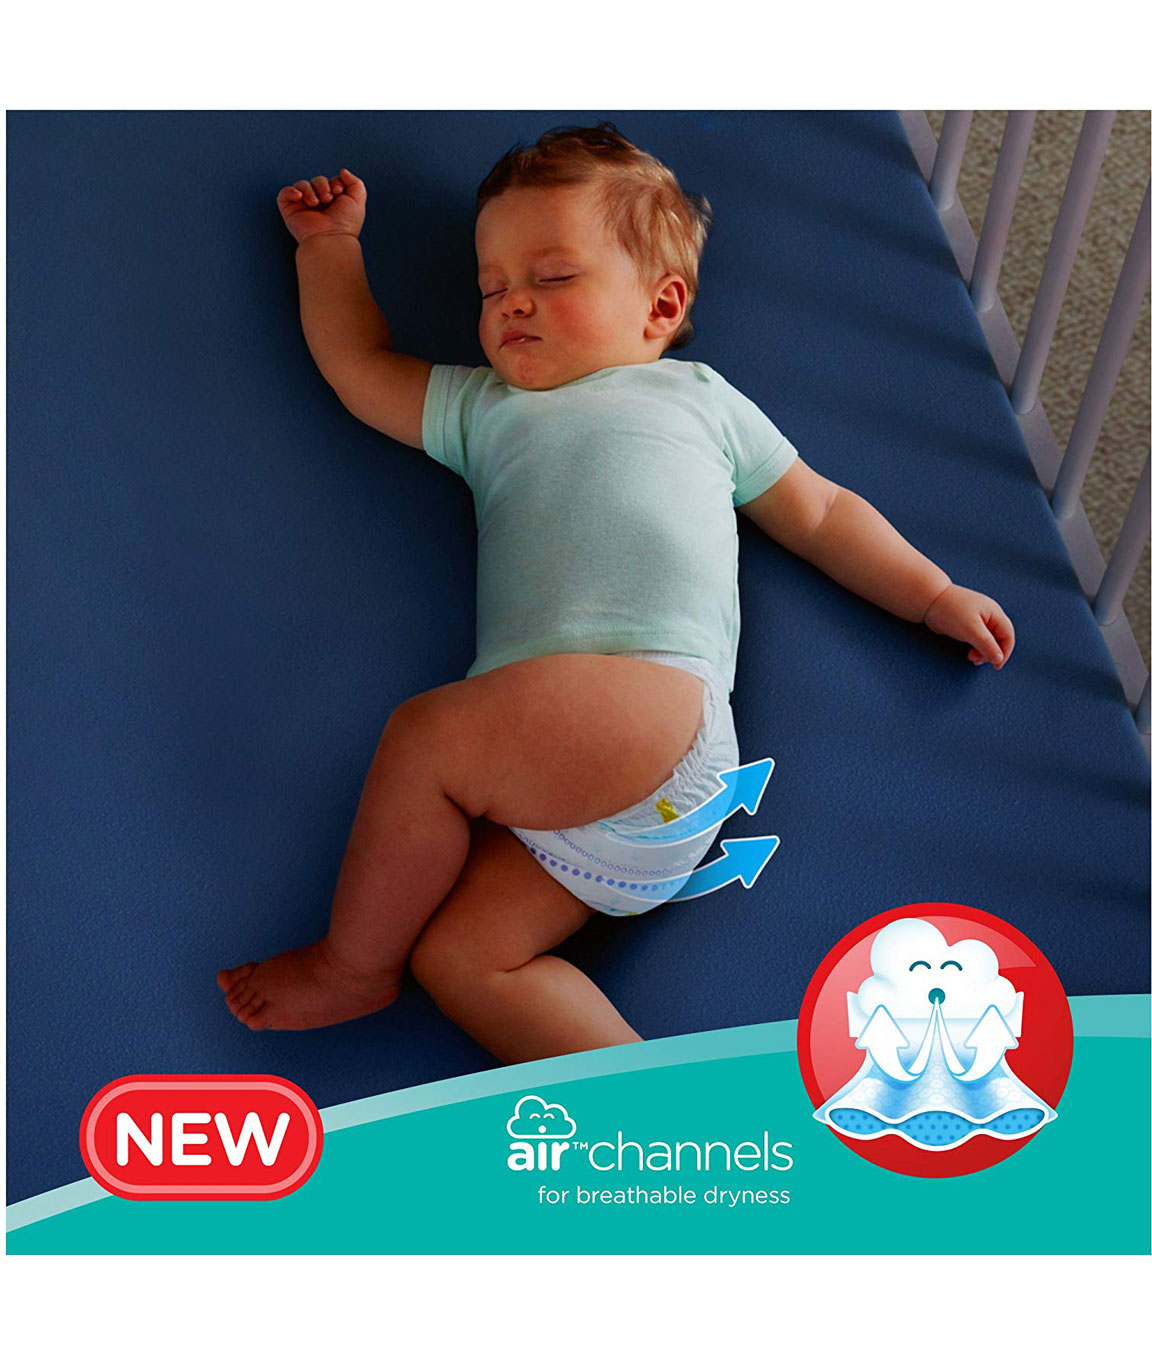 Buy Pampers All round Protection Pants, Small size baby diapers (4-8kg) 56  Count, Anti Rash diapers, Lotion with Aloe Vera Online at Low Prices in  India - Amazon.in